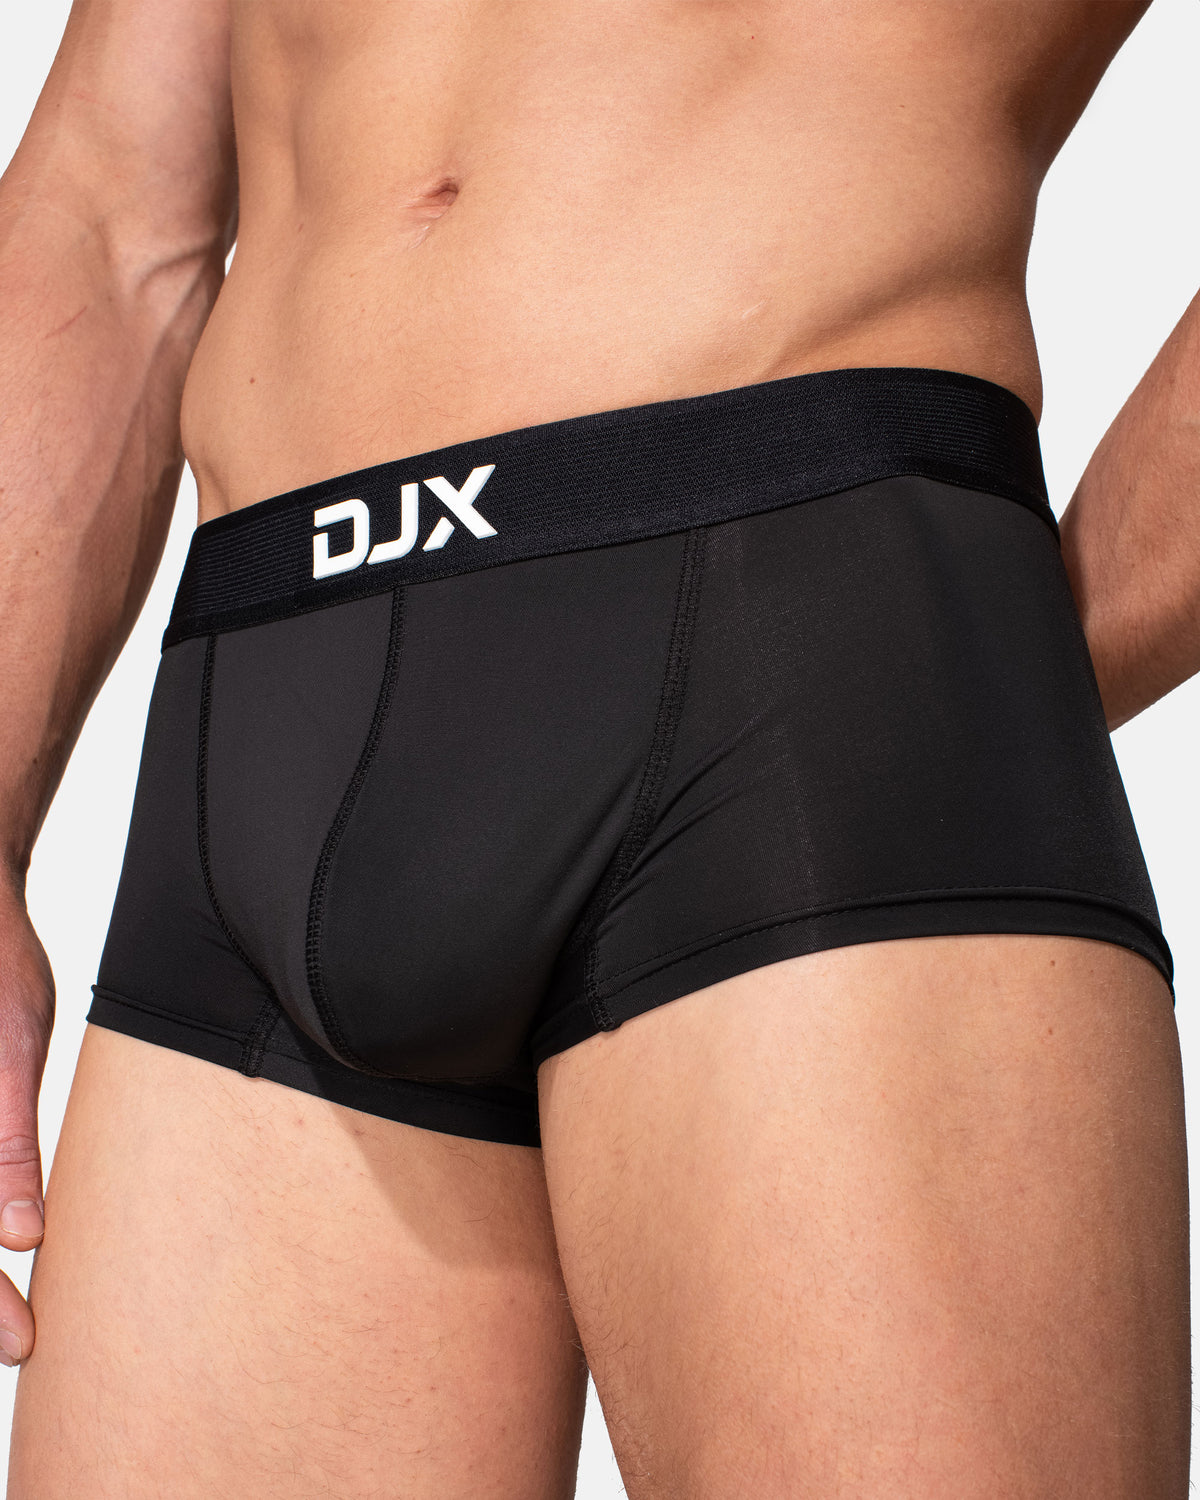 Australian clothing brand launches sexy underwear for men